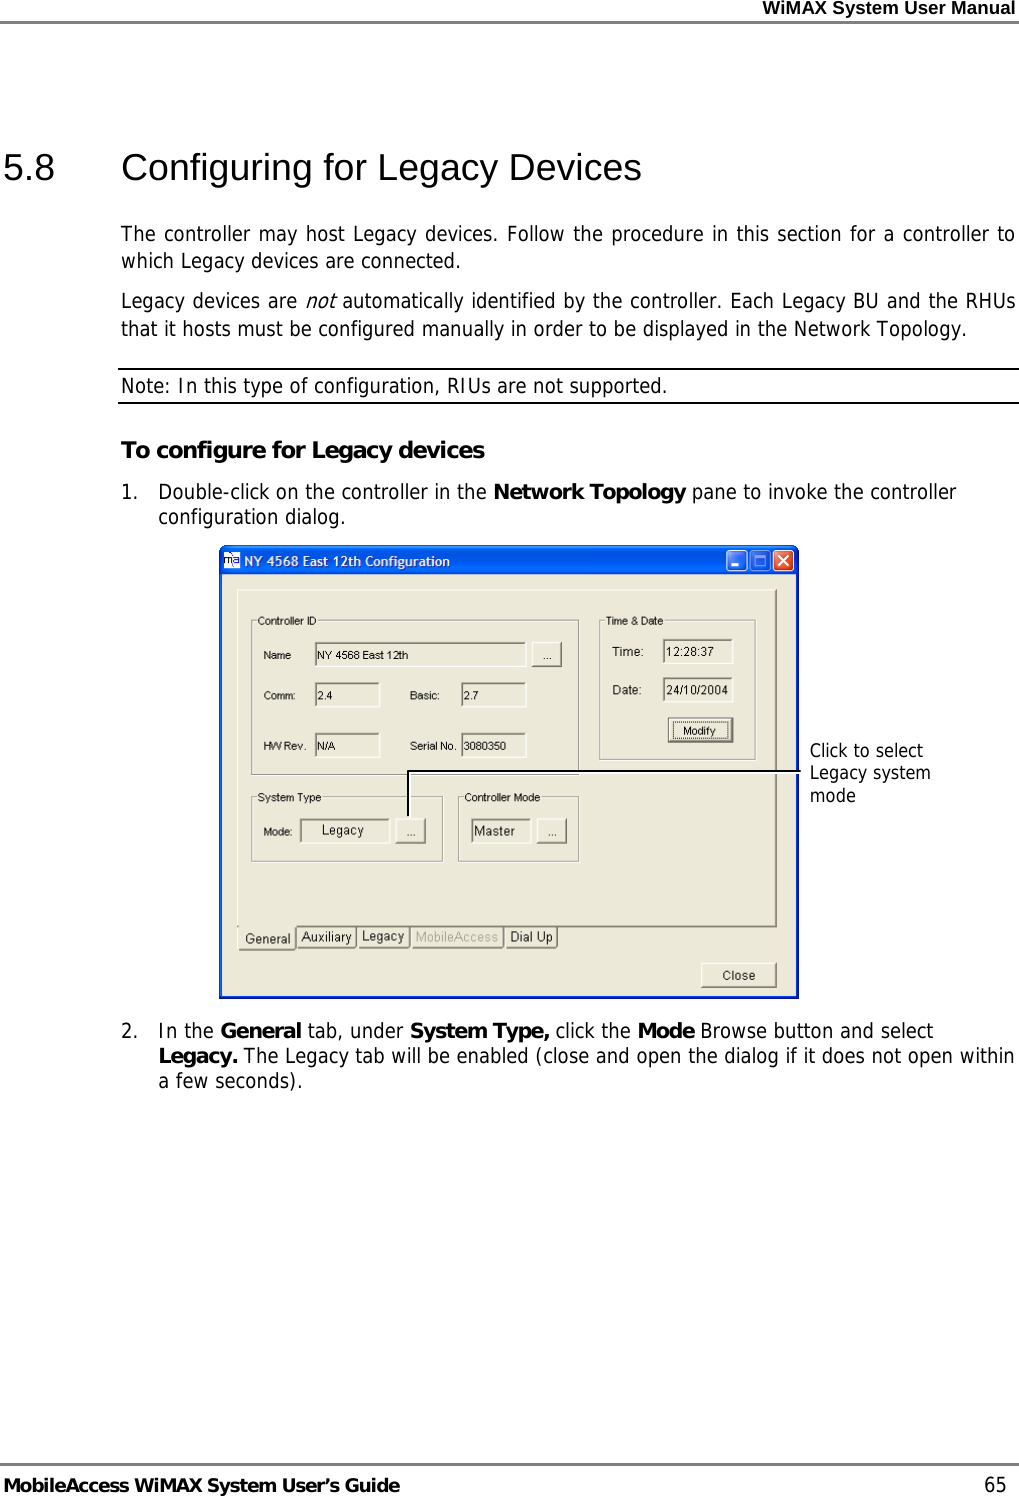 WiMAX System User Manual     MobileAccess WiMAX System User’s Guide    65  5.8  Configuring for Legacy Devices The controller may host Legacy devices. Follow the procedure in this section for a controller to which Legacy devices are connected. Legacy devices are not automatically identified by the controller. Each Legacy BU and the RHUs that it hosts must be configured manually in order to be displayed in the Network Topology.  Note: In this type of configuration, RIUs are not supported. To configure for Legacy devices 1.  Double-click on the controller in the Network Topology pane to invoke the controller configuration dialog.  2. In the General tab, under System Type, click the Mode Browse button and select Legacy. The Legacy tab will be enabled (close and open the dialog if it does not open within a few seconds).  Click to select Legacy system mode 